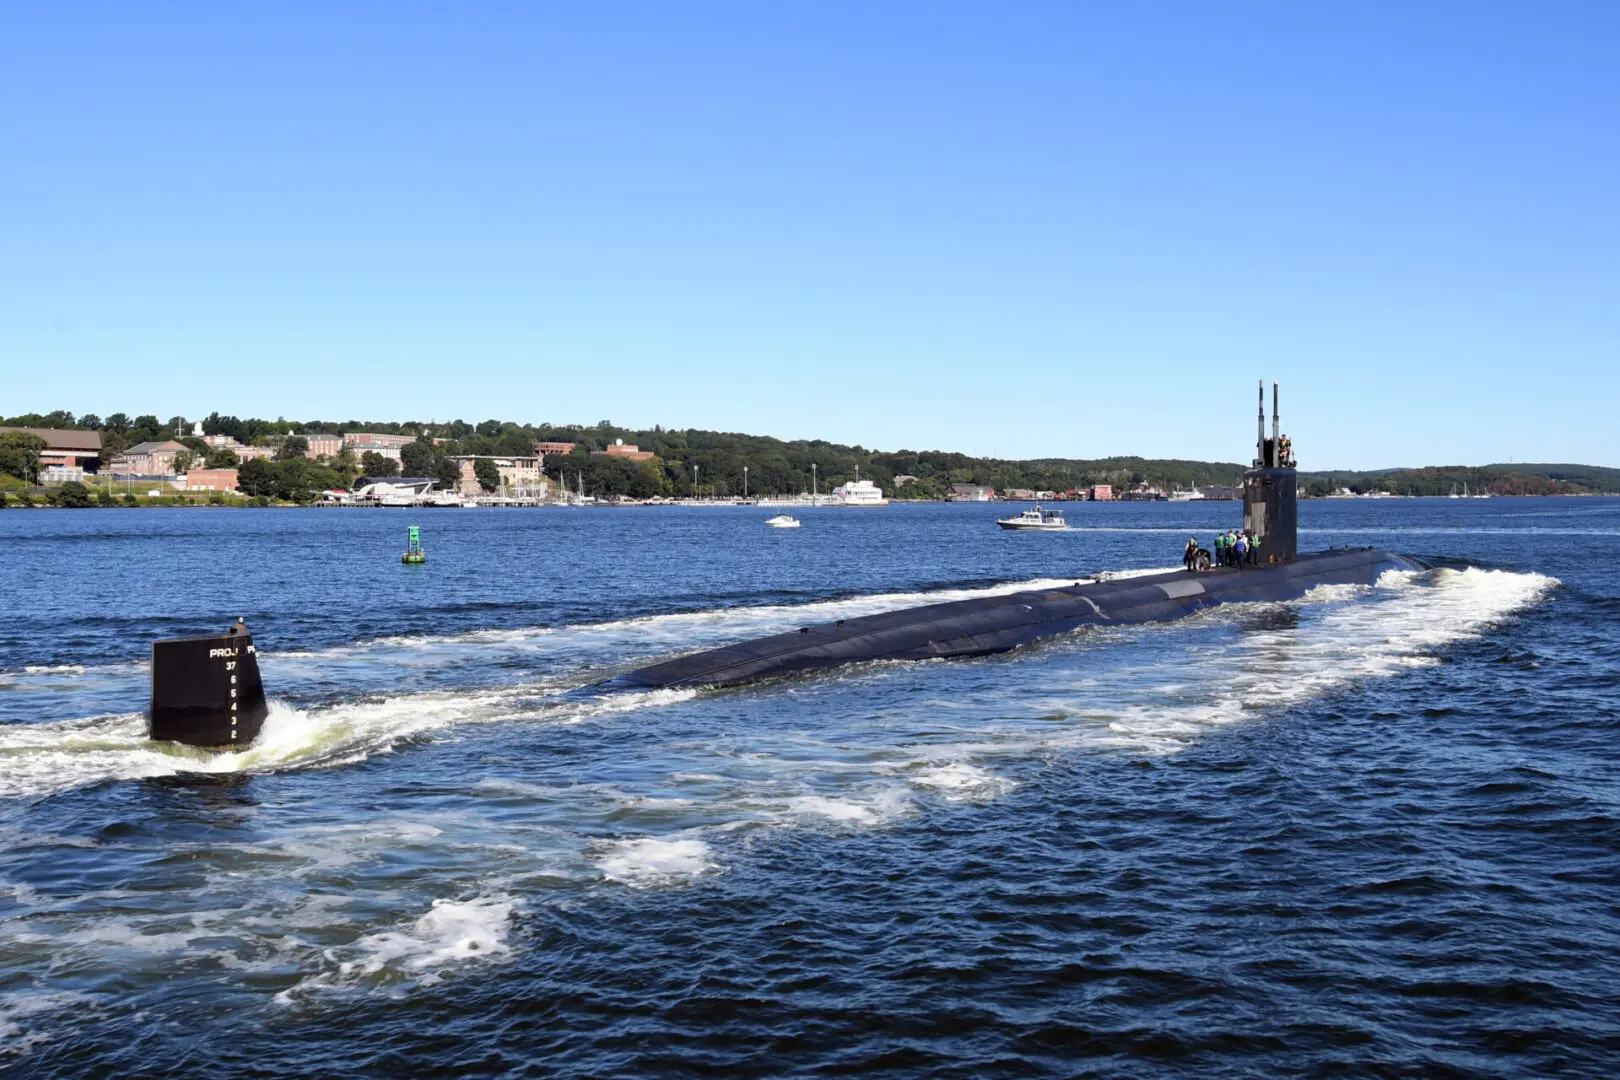 GROTON, Conn. (Sept. 2, 2022) The Los Angeles-class submarine USS San Juan (SSN 751) transits the Thames River as the boat returns from routine operations to Naval Submarine Base New London in Groton, Conn. San Juan and crew operate under Submarine Squadron (SUBRON) TWELVE and its primary mission is to provide attack submarines that are ready, willing, and able to meet the unique challenges of undersea combat and deployed operations in unforgiving environments across the globe. (U.S. Navy photo by Chief Mass Communication Specialist Joshua Karsten)